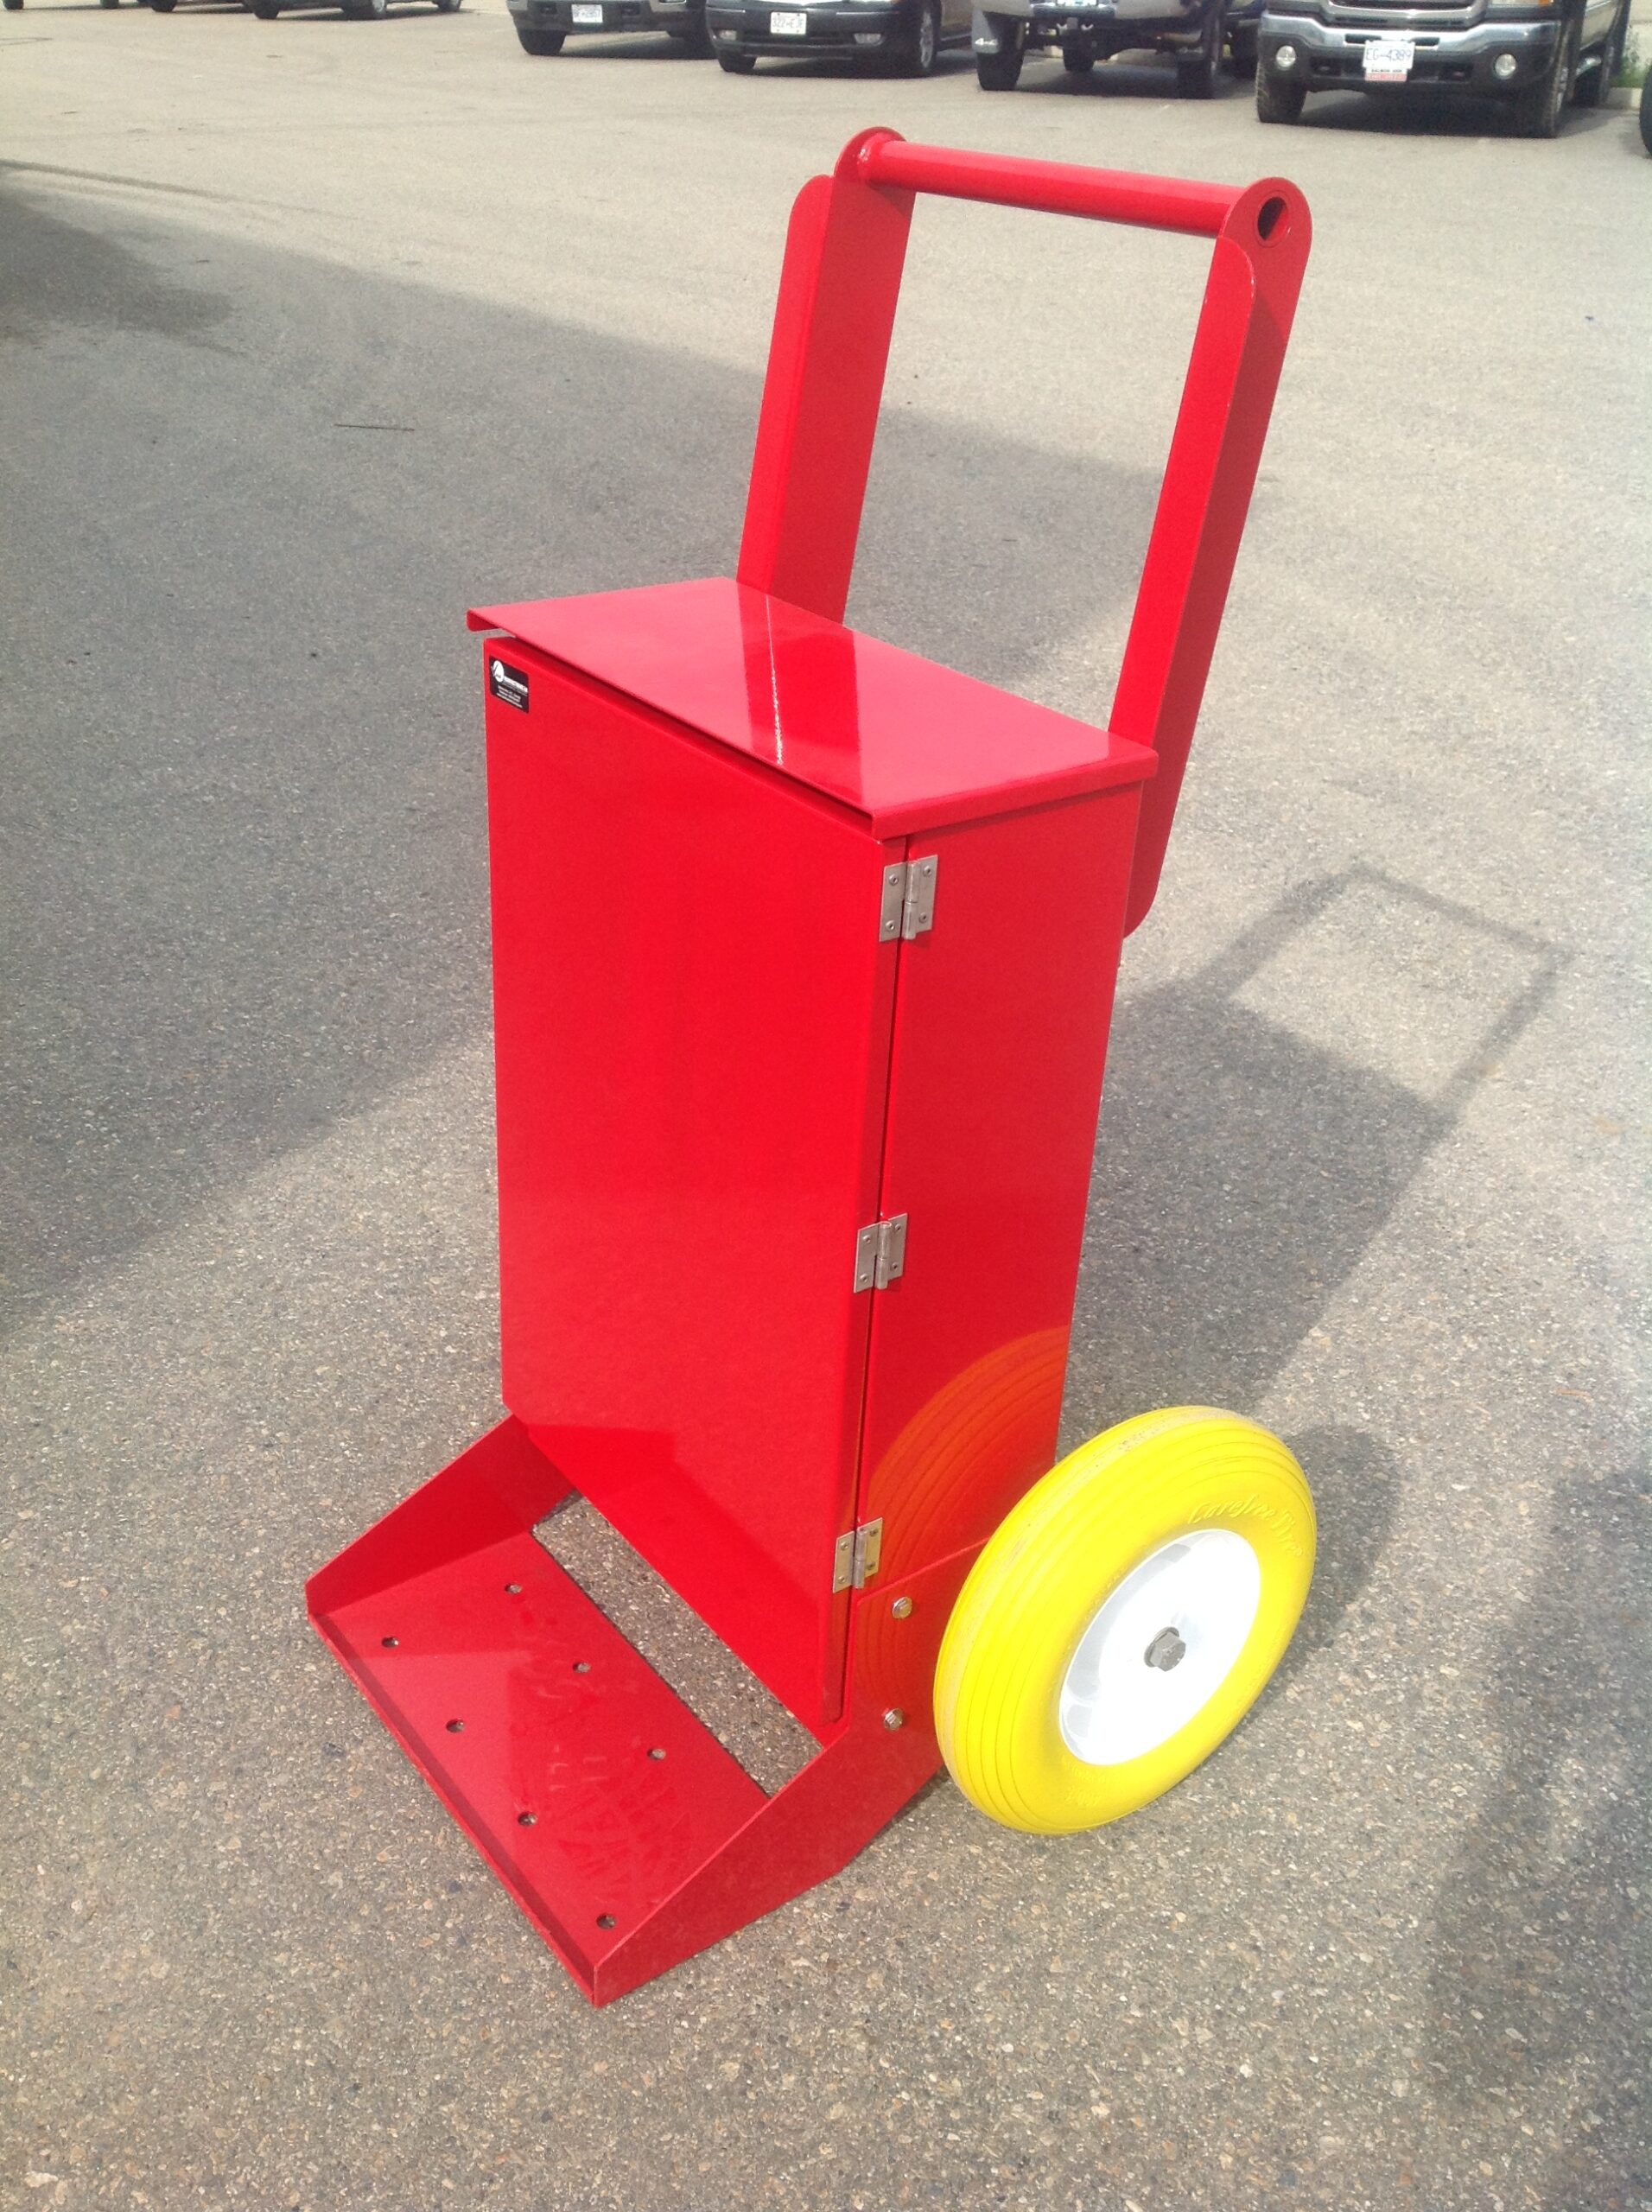 Side view of a red temporary power distribution cart in a parking lot.